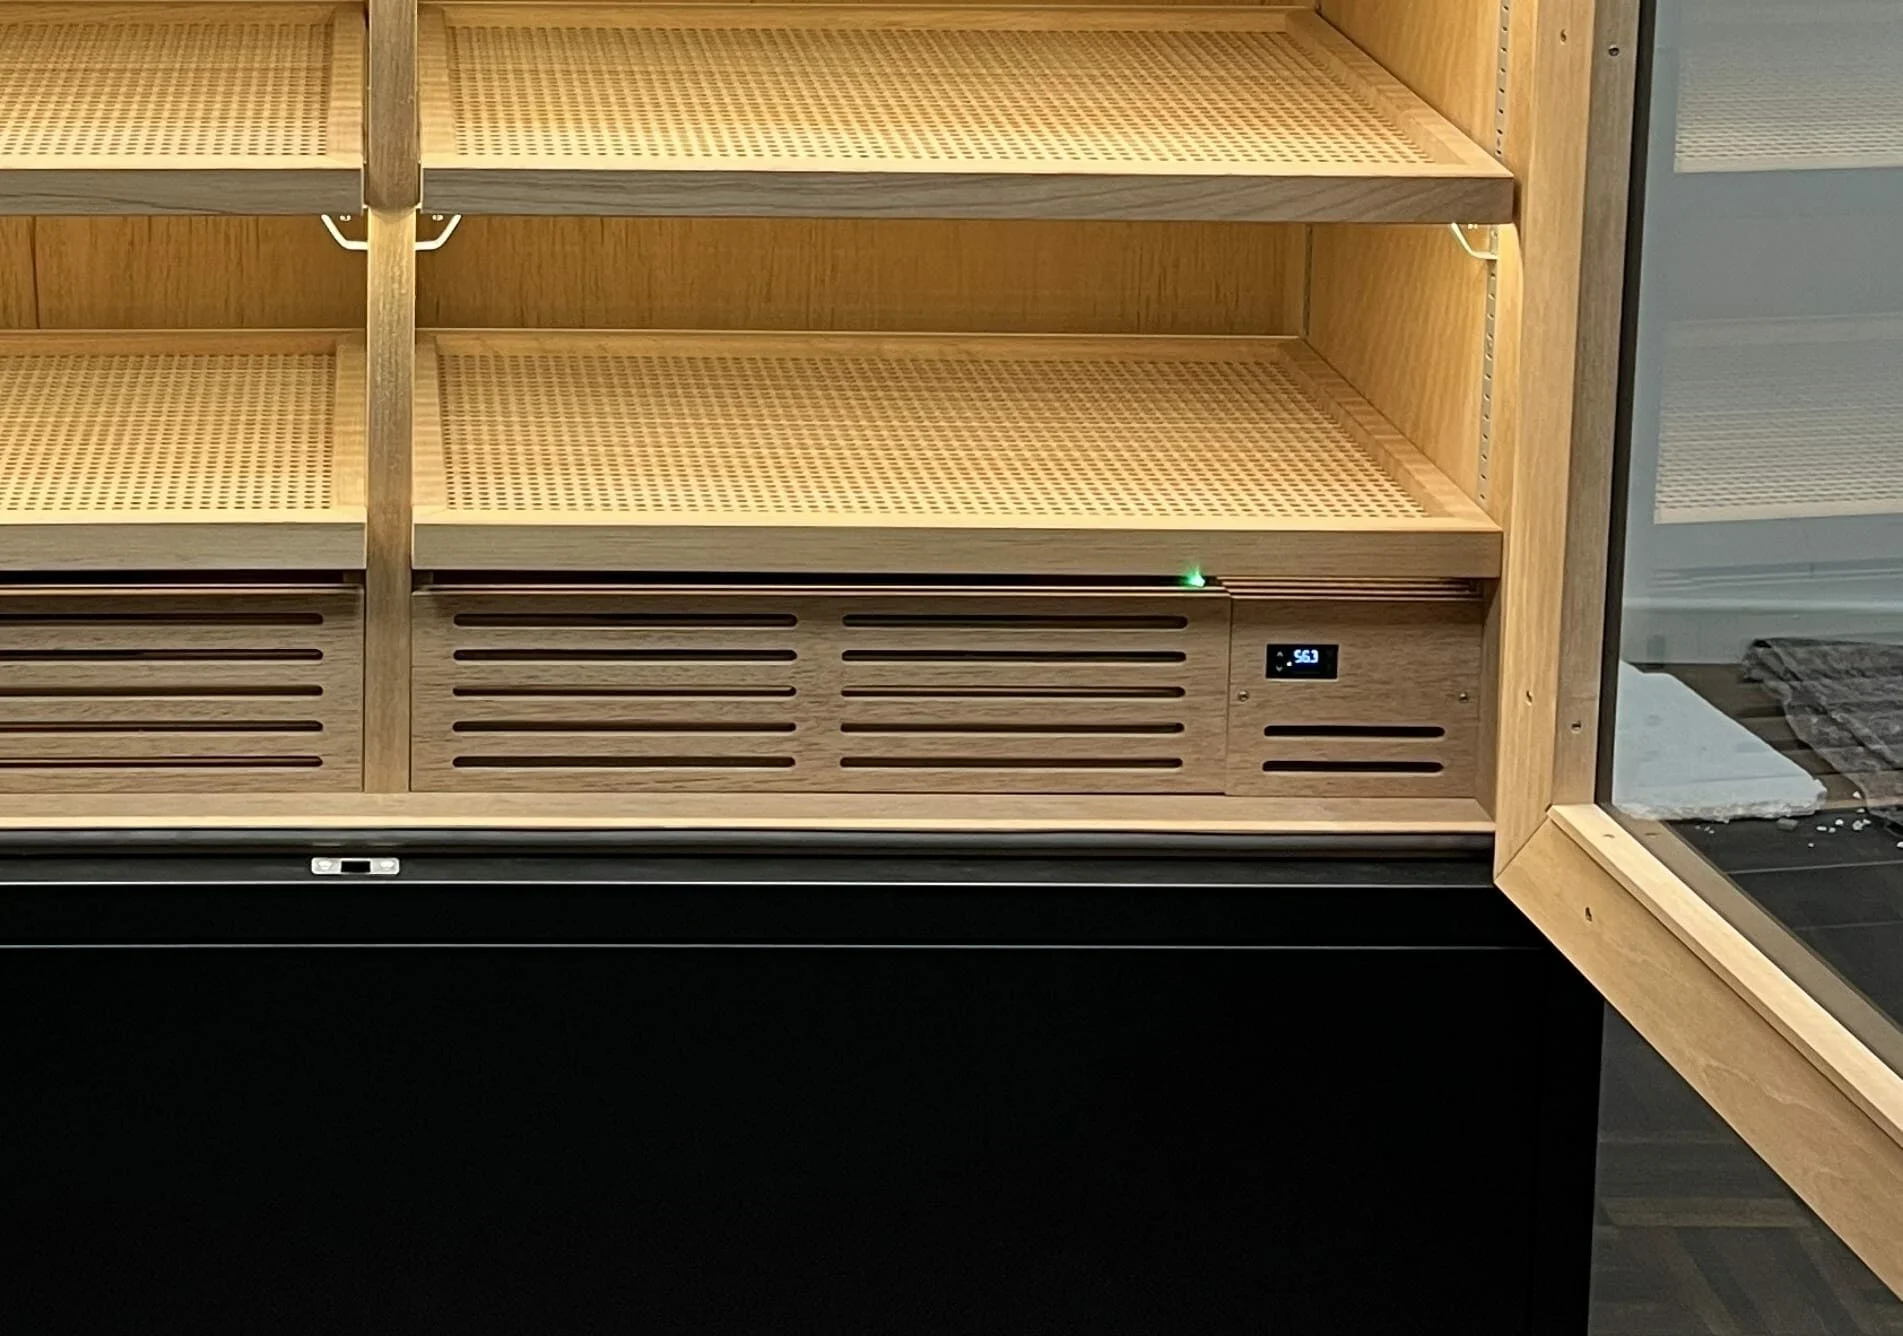 Humidity in humidor automatically regulated for best cigar storage